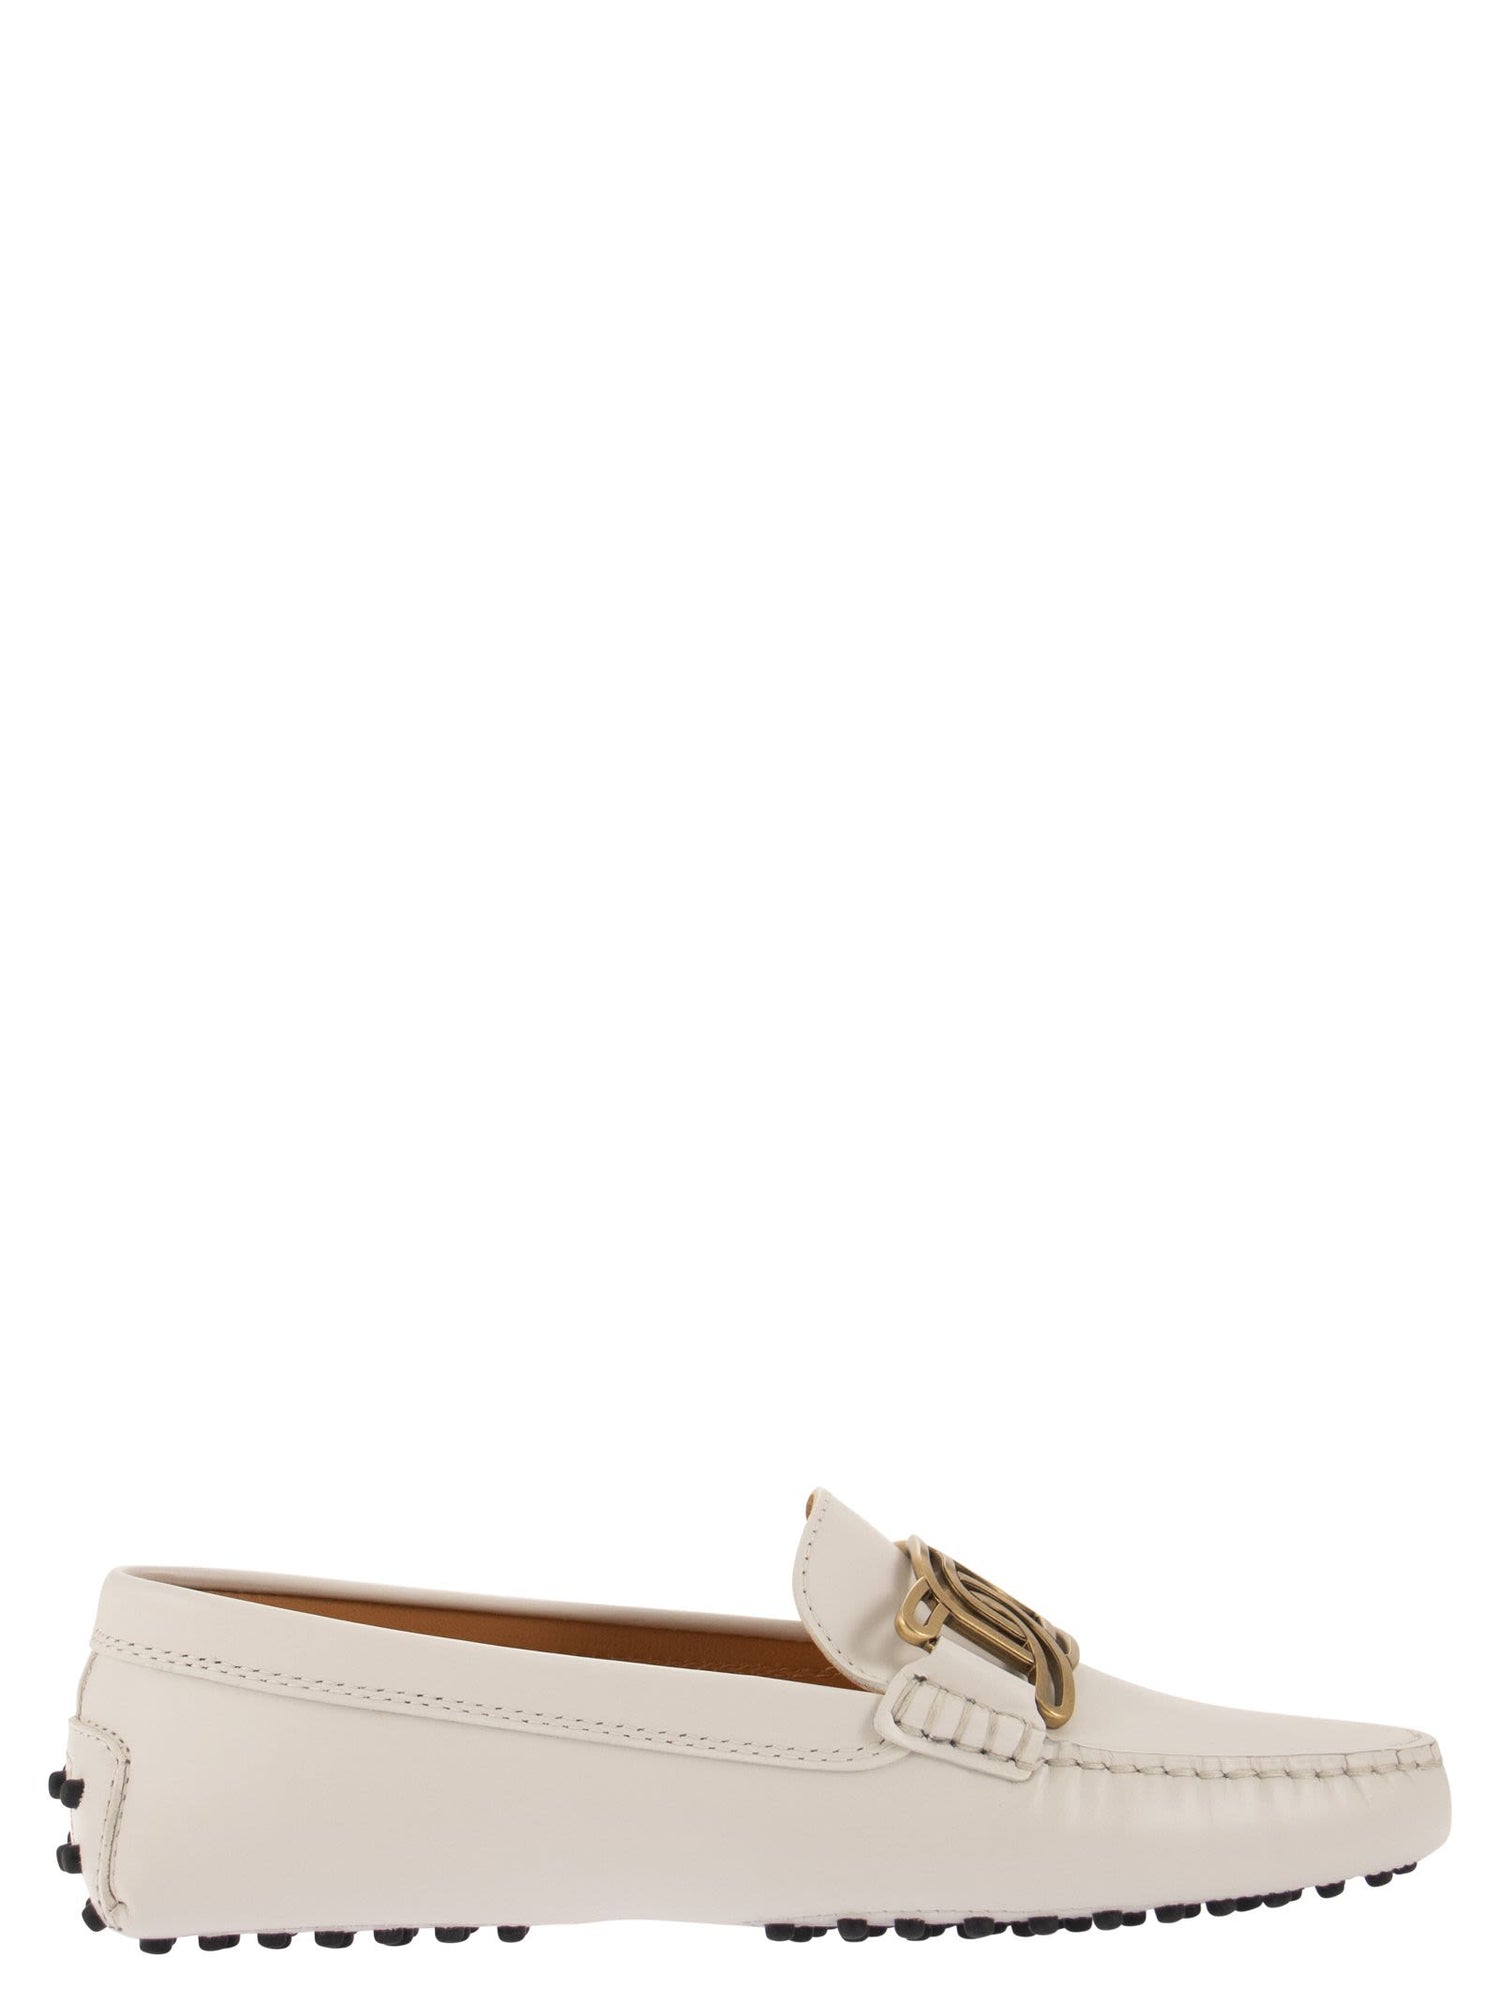 Tod's - Kate Sandals in Leather, White, 36.5 - Shoes